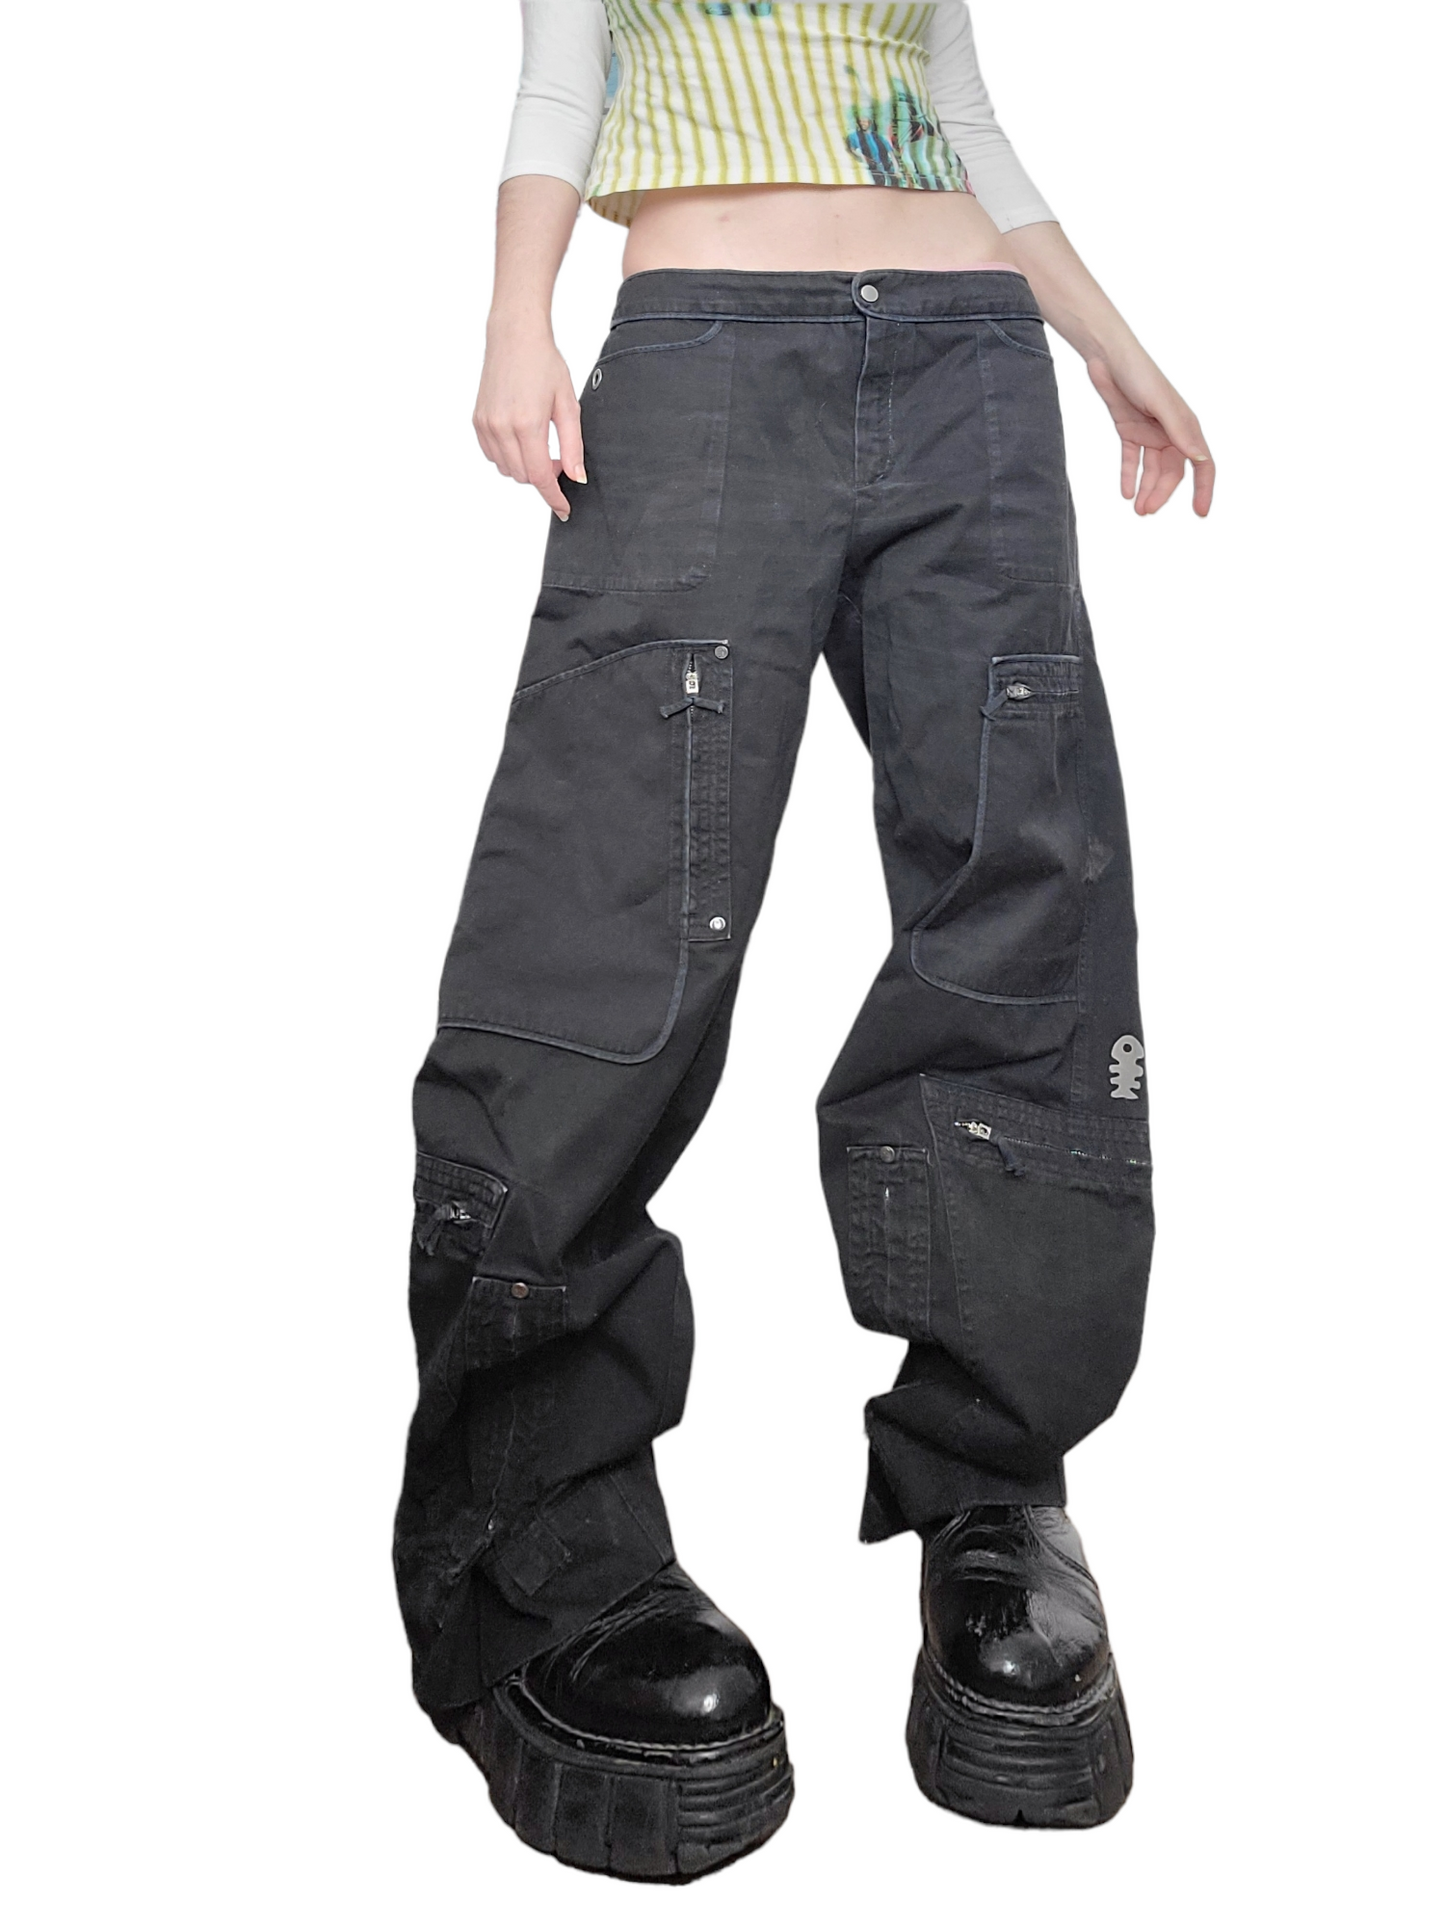 Cargo baggy oversize fairygrunge grunge skater streetwear vintage 90s dystopian cybery2k post apo multipoches